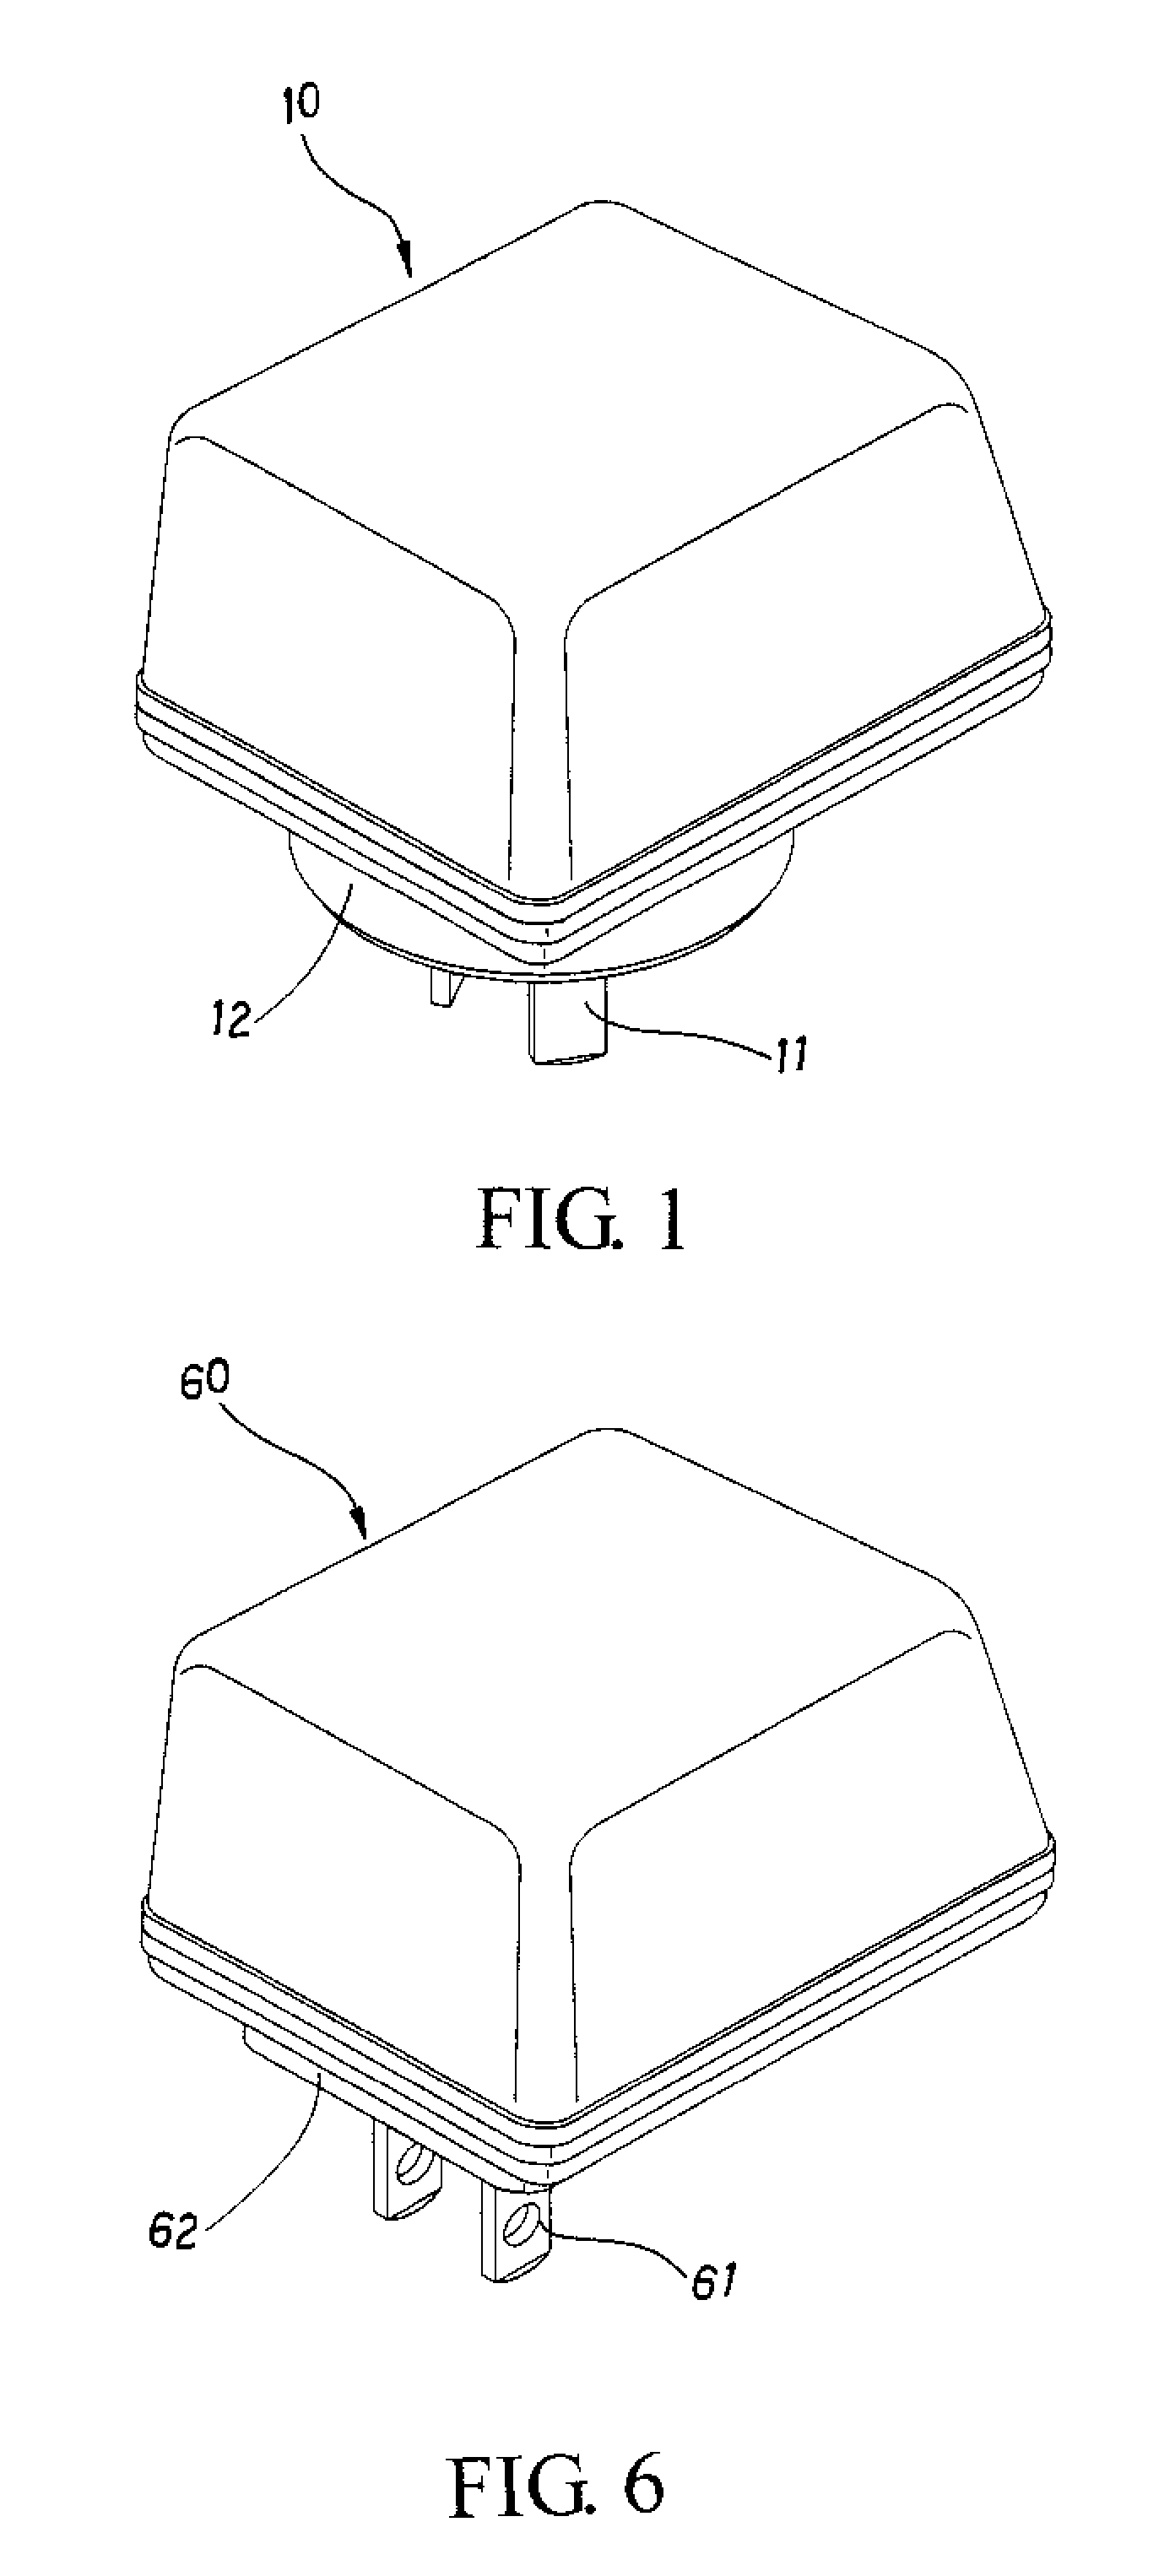 Power plugging device with a function of releasing charges from electric surges